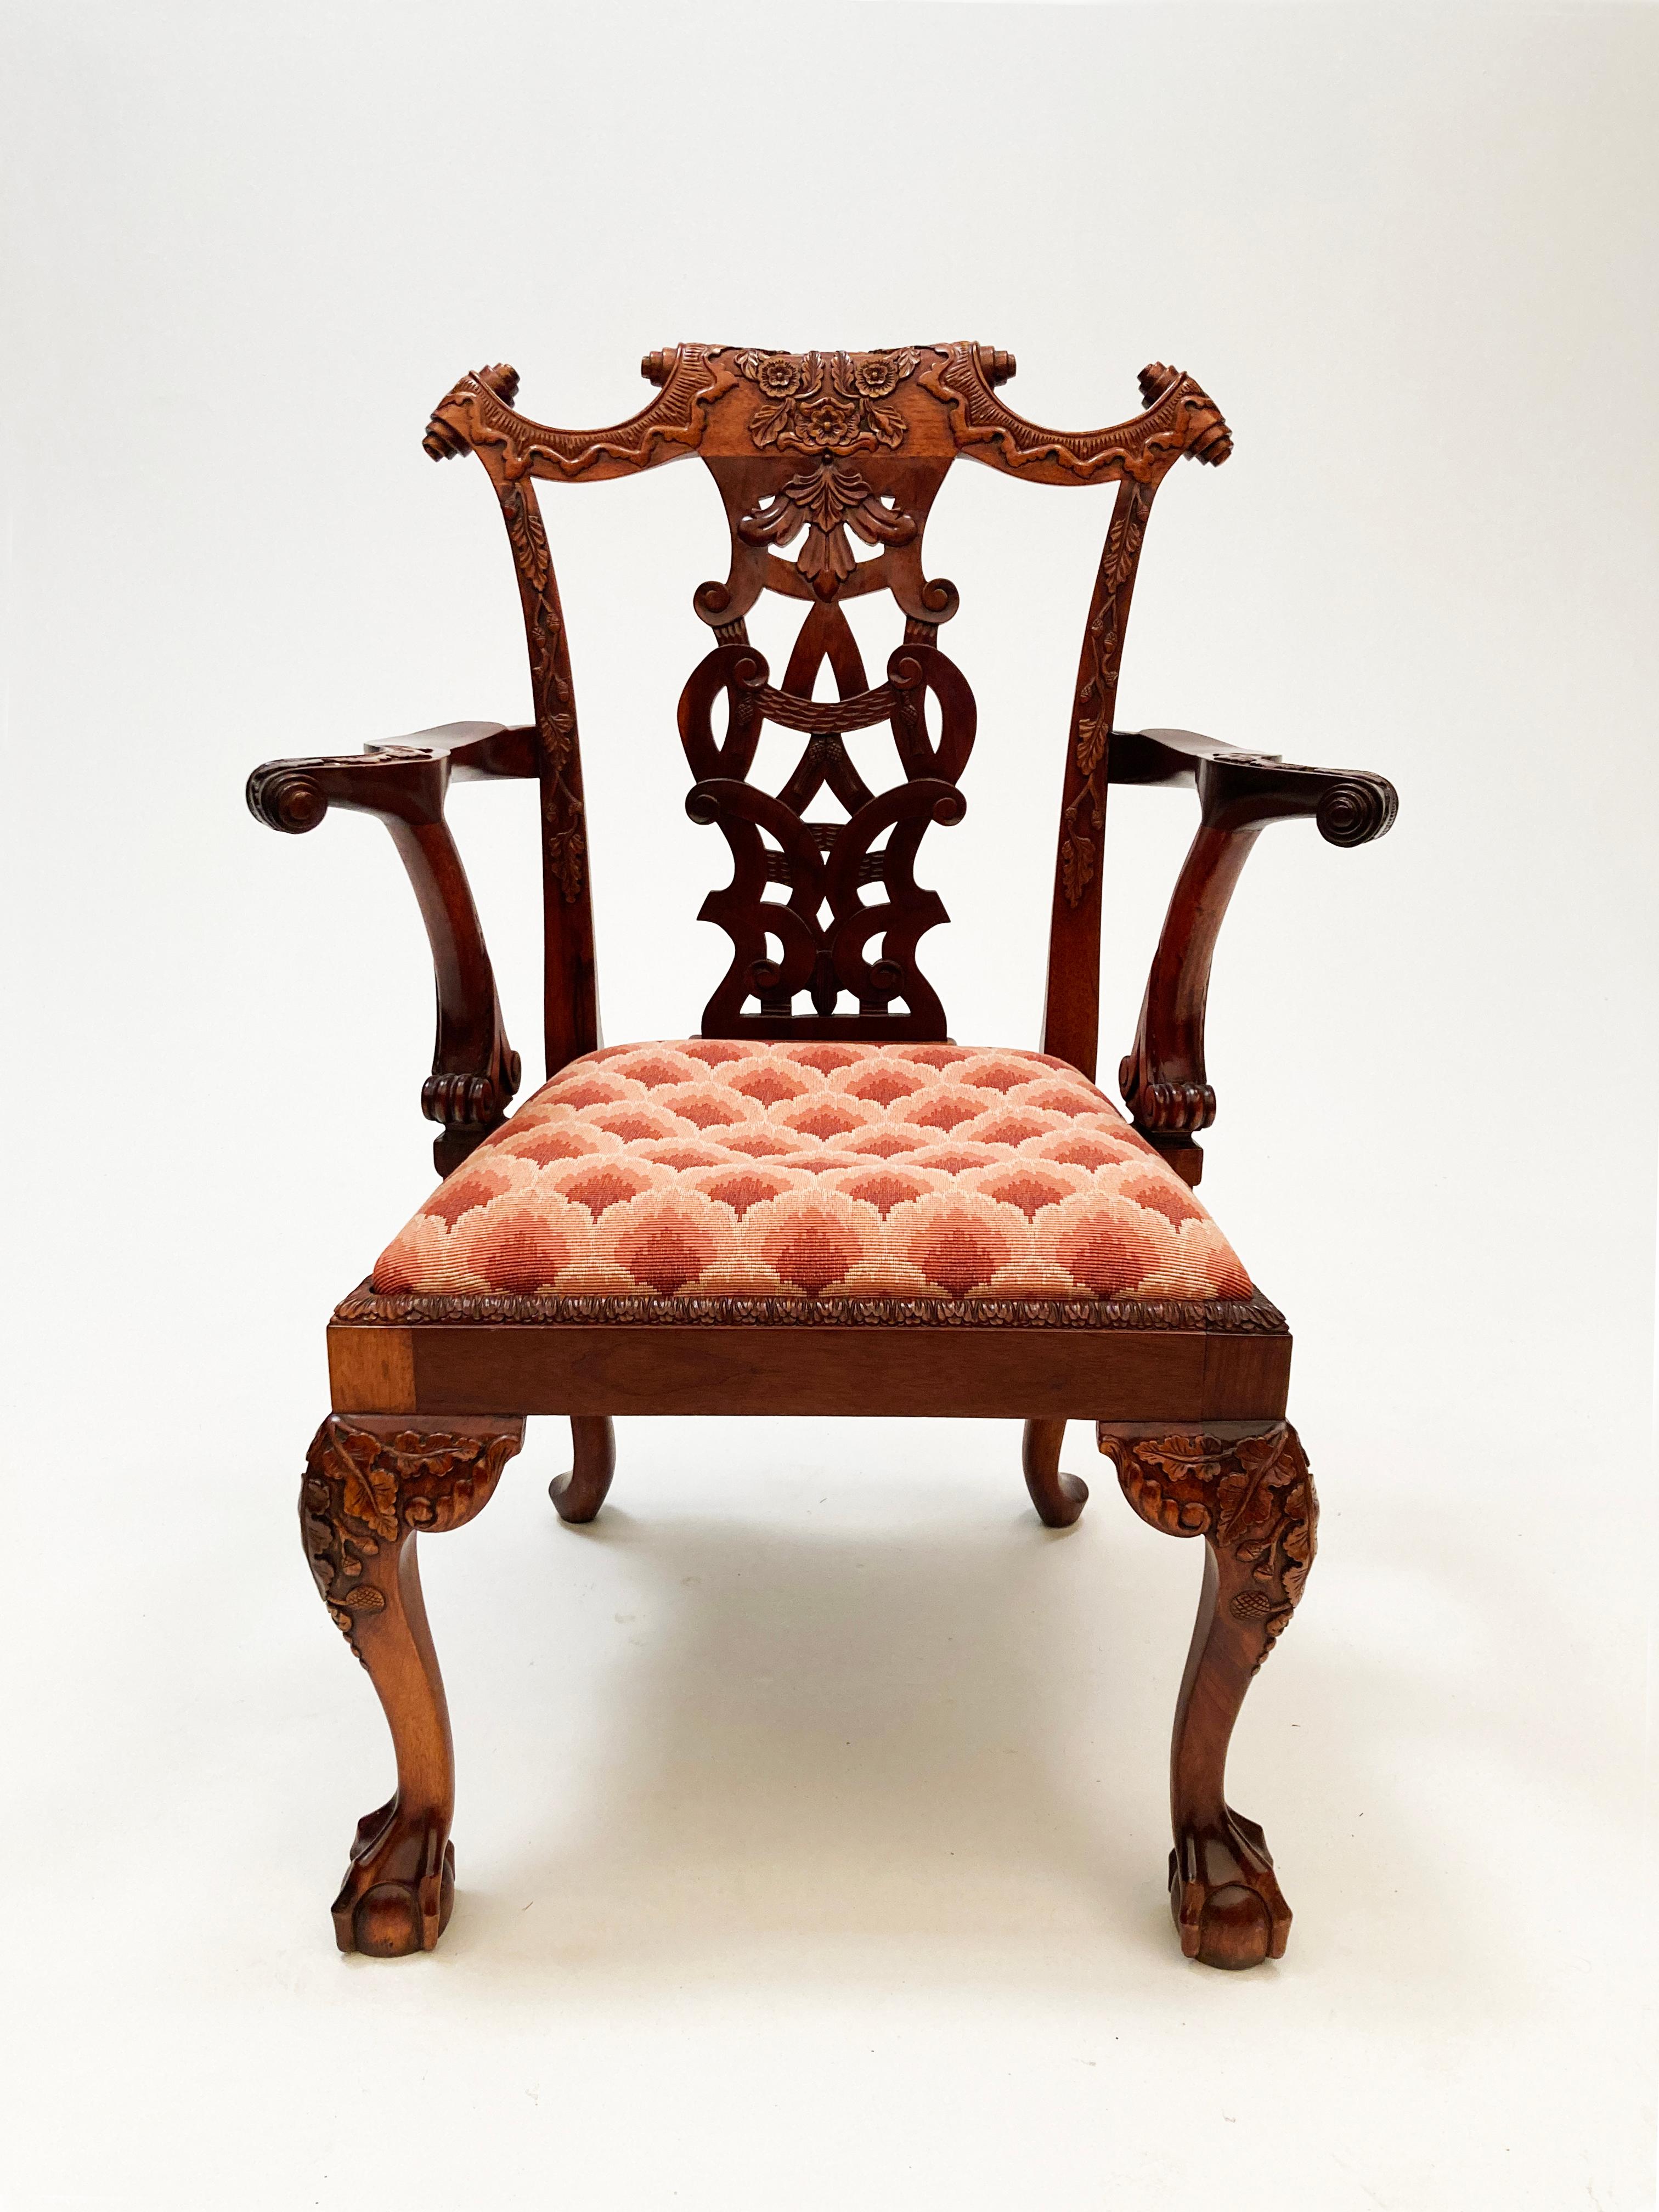 Northern Irish Early 20th Century Mahogany Irish Antique Replica Chippendale Chairs- Set of 2 For Sale